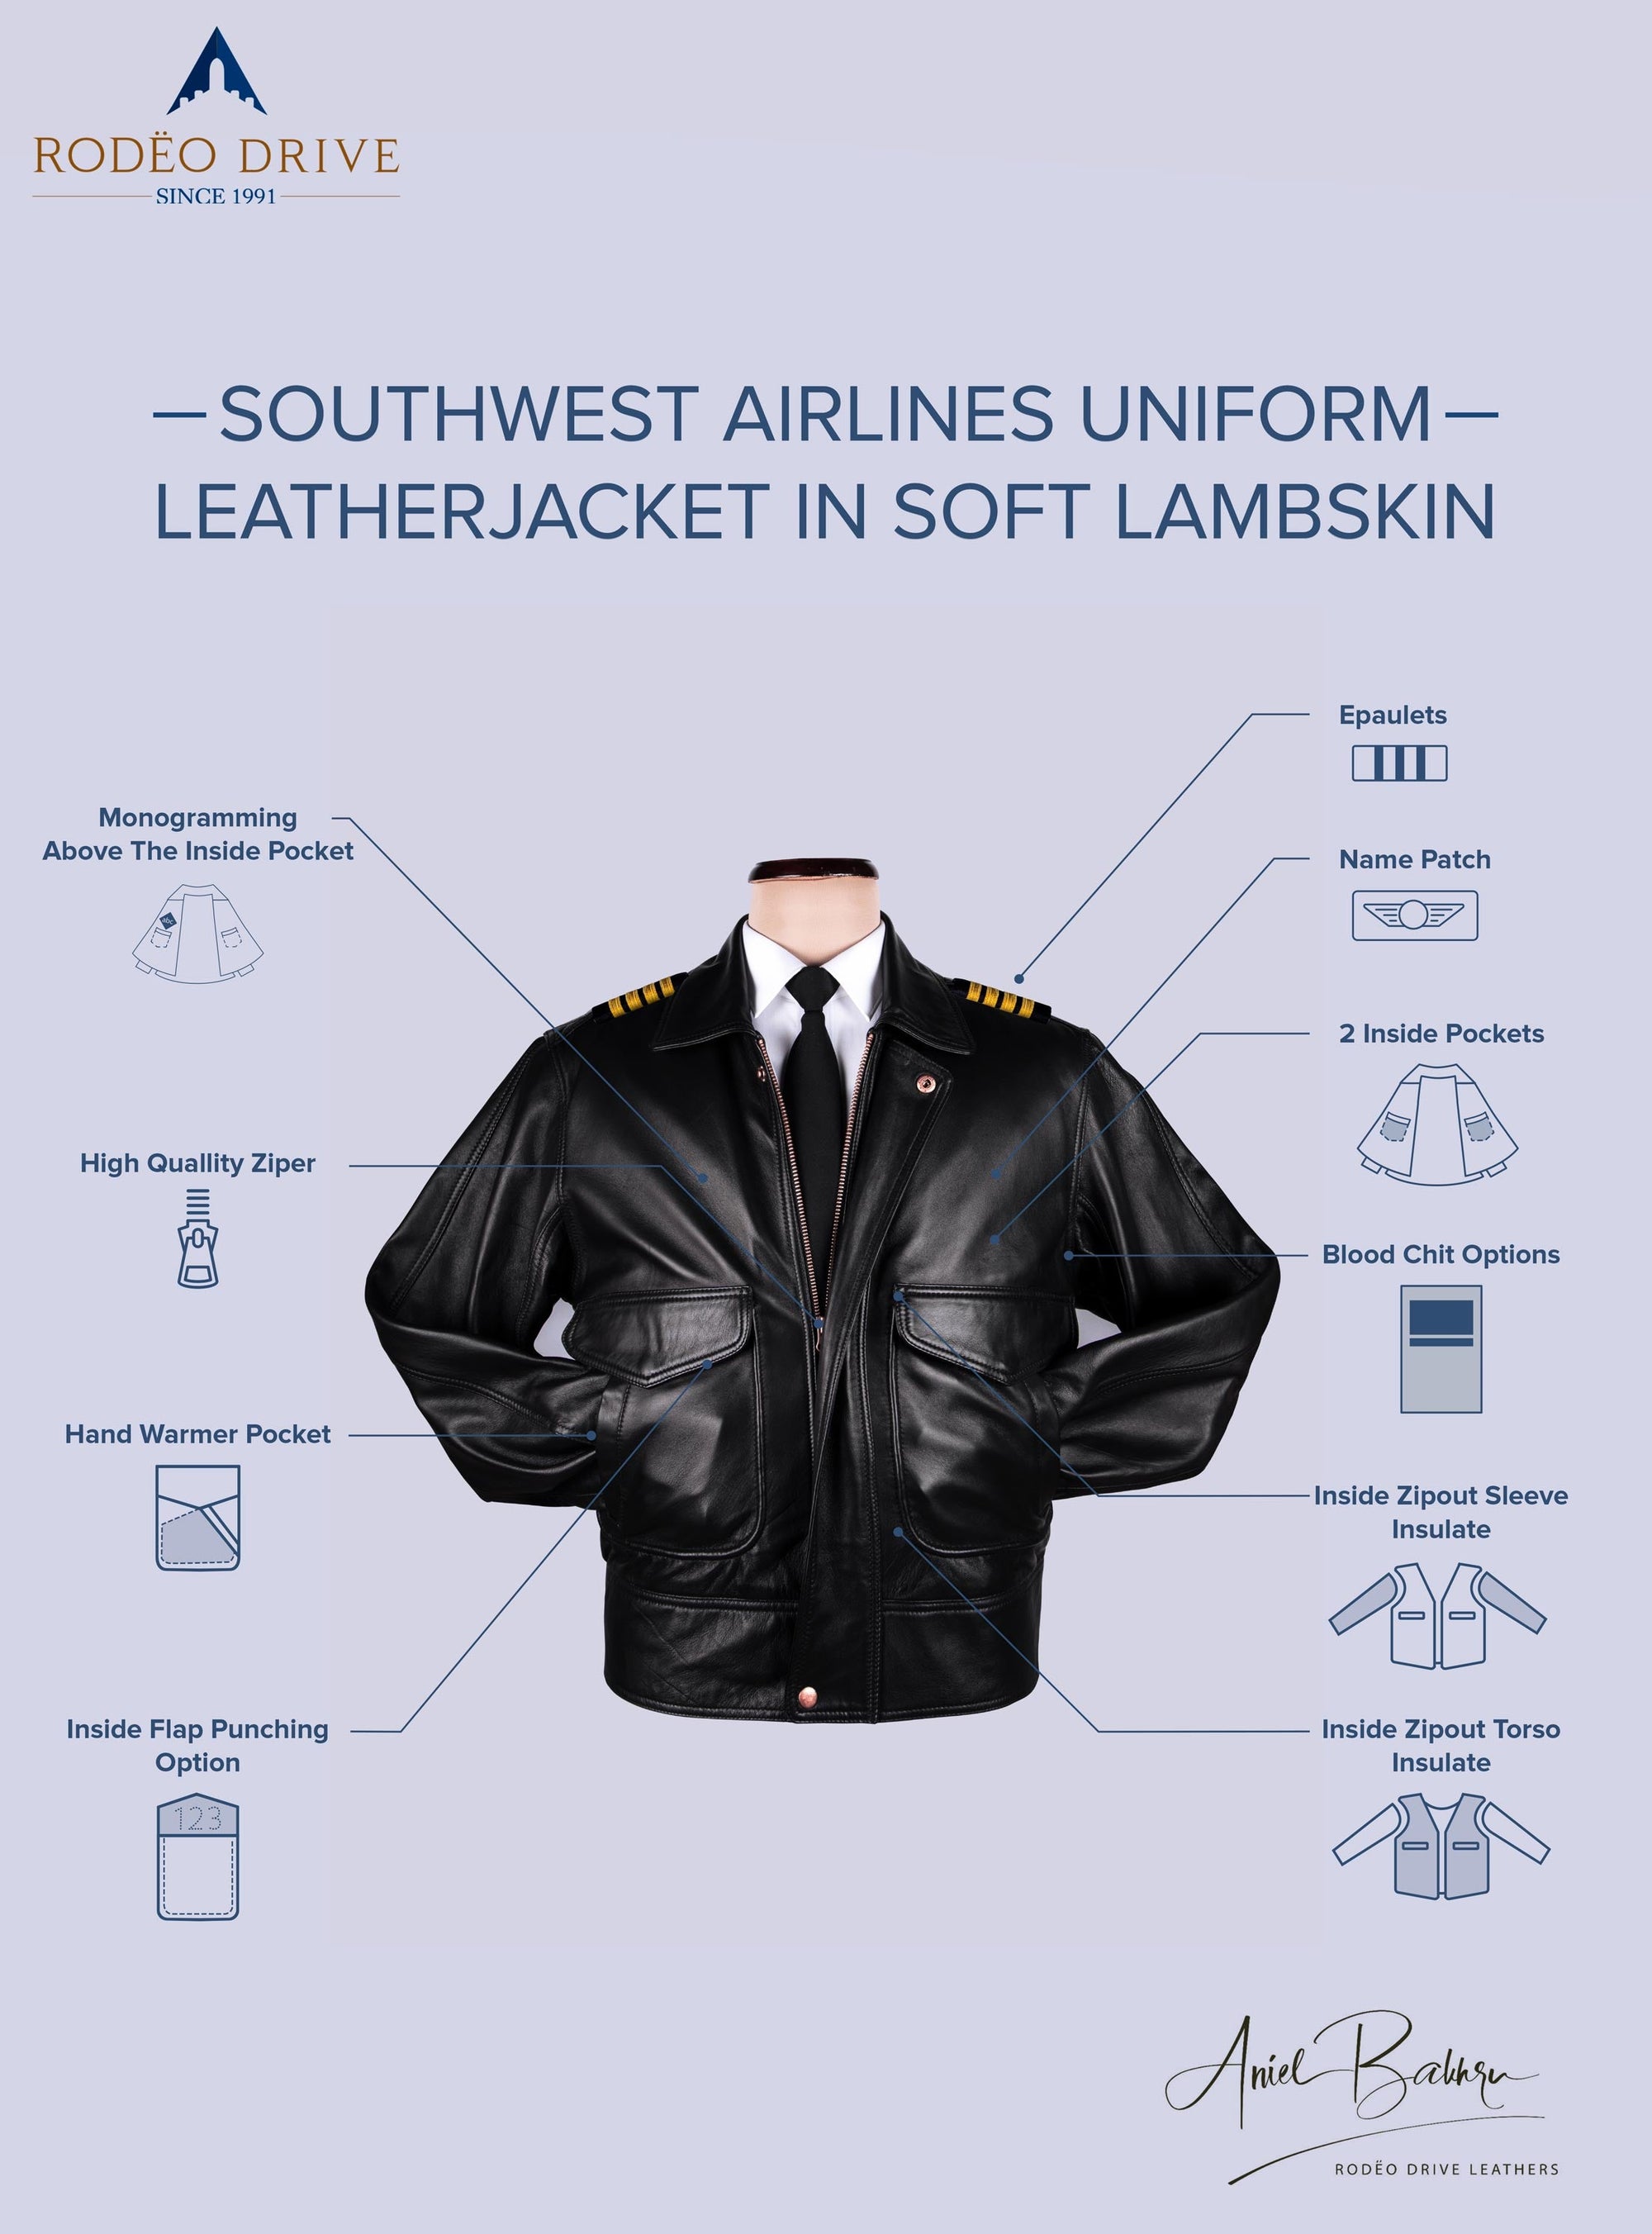 Features of southwest airlines uniform - leatherjacket in soft lambskin